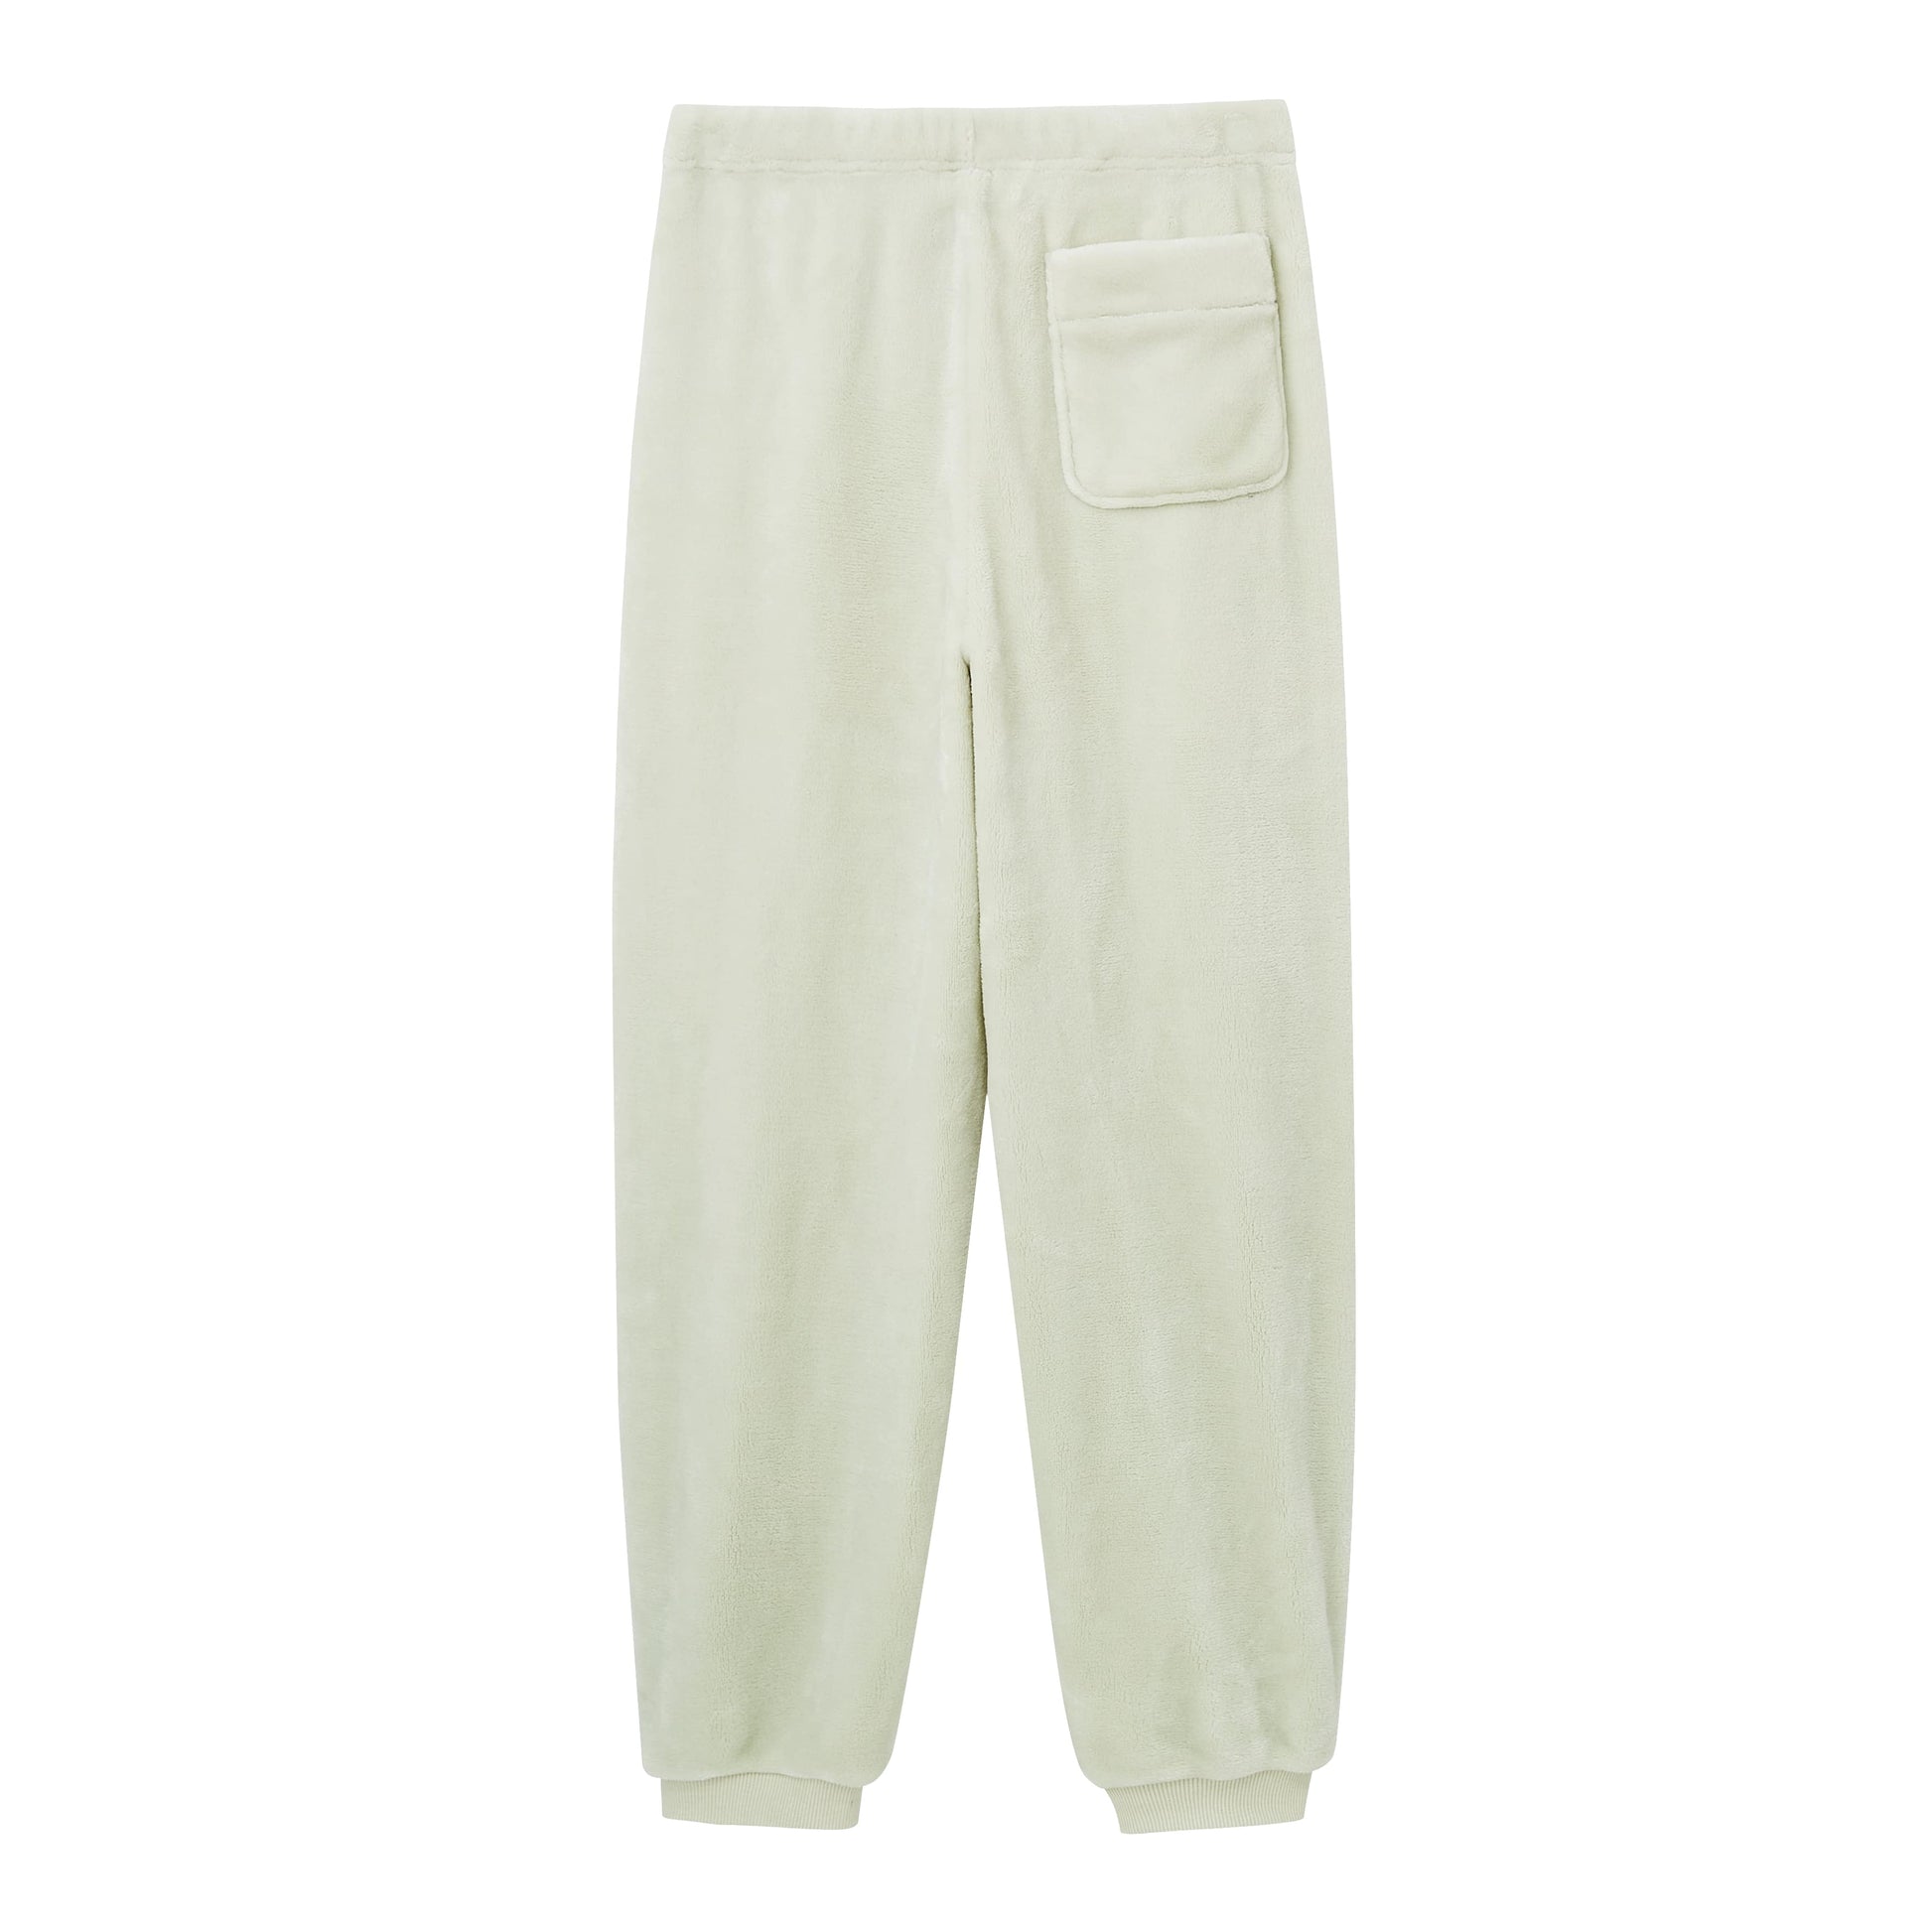 Light Blue Color Tapered Lounge Pants from back